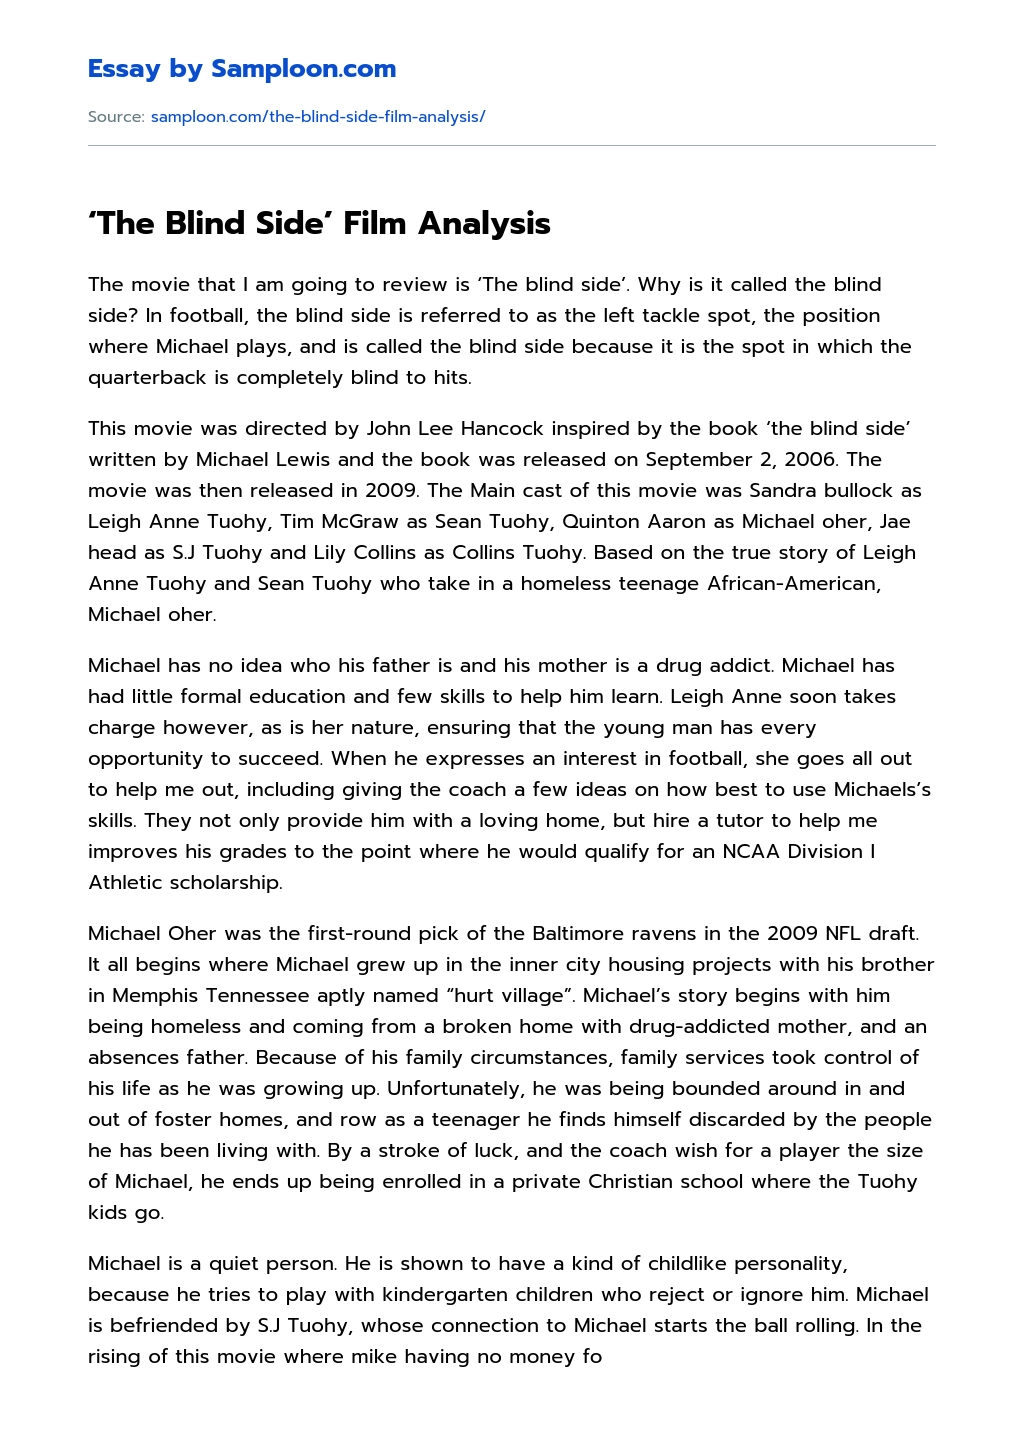 ‘The Blind Side’ Film Analysis essay